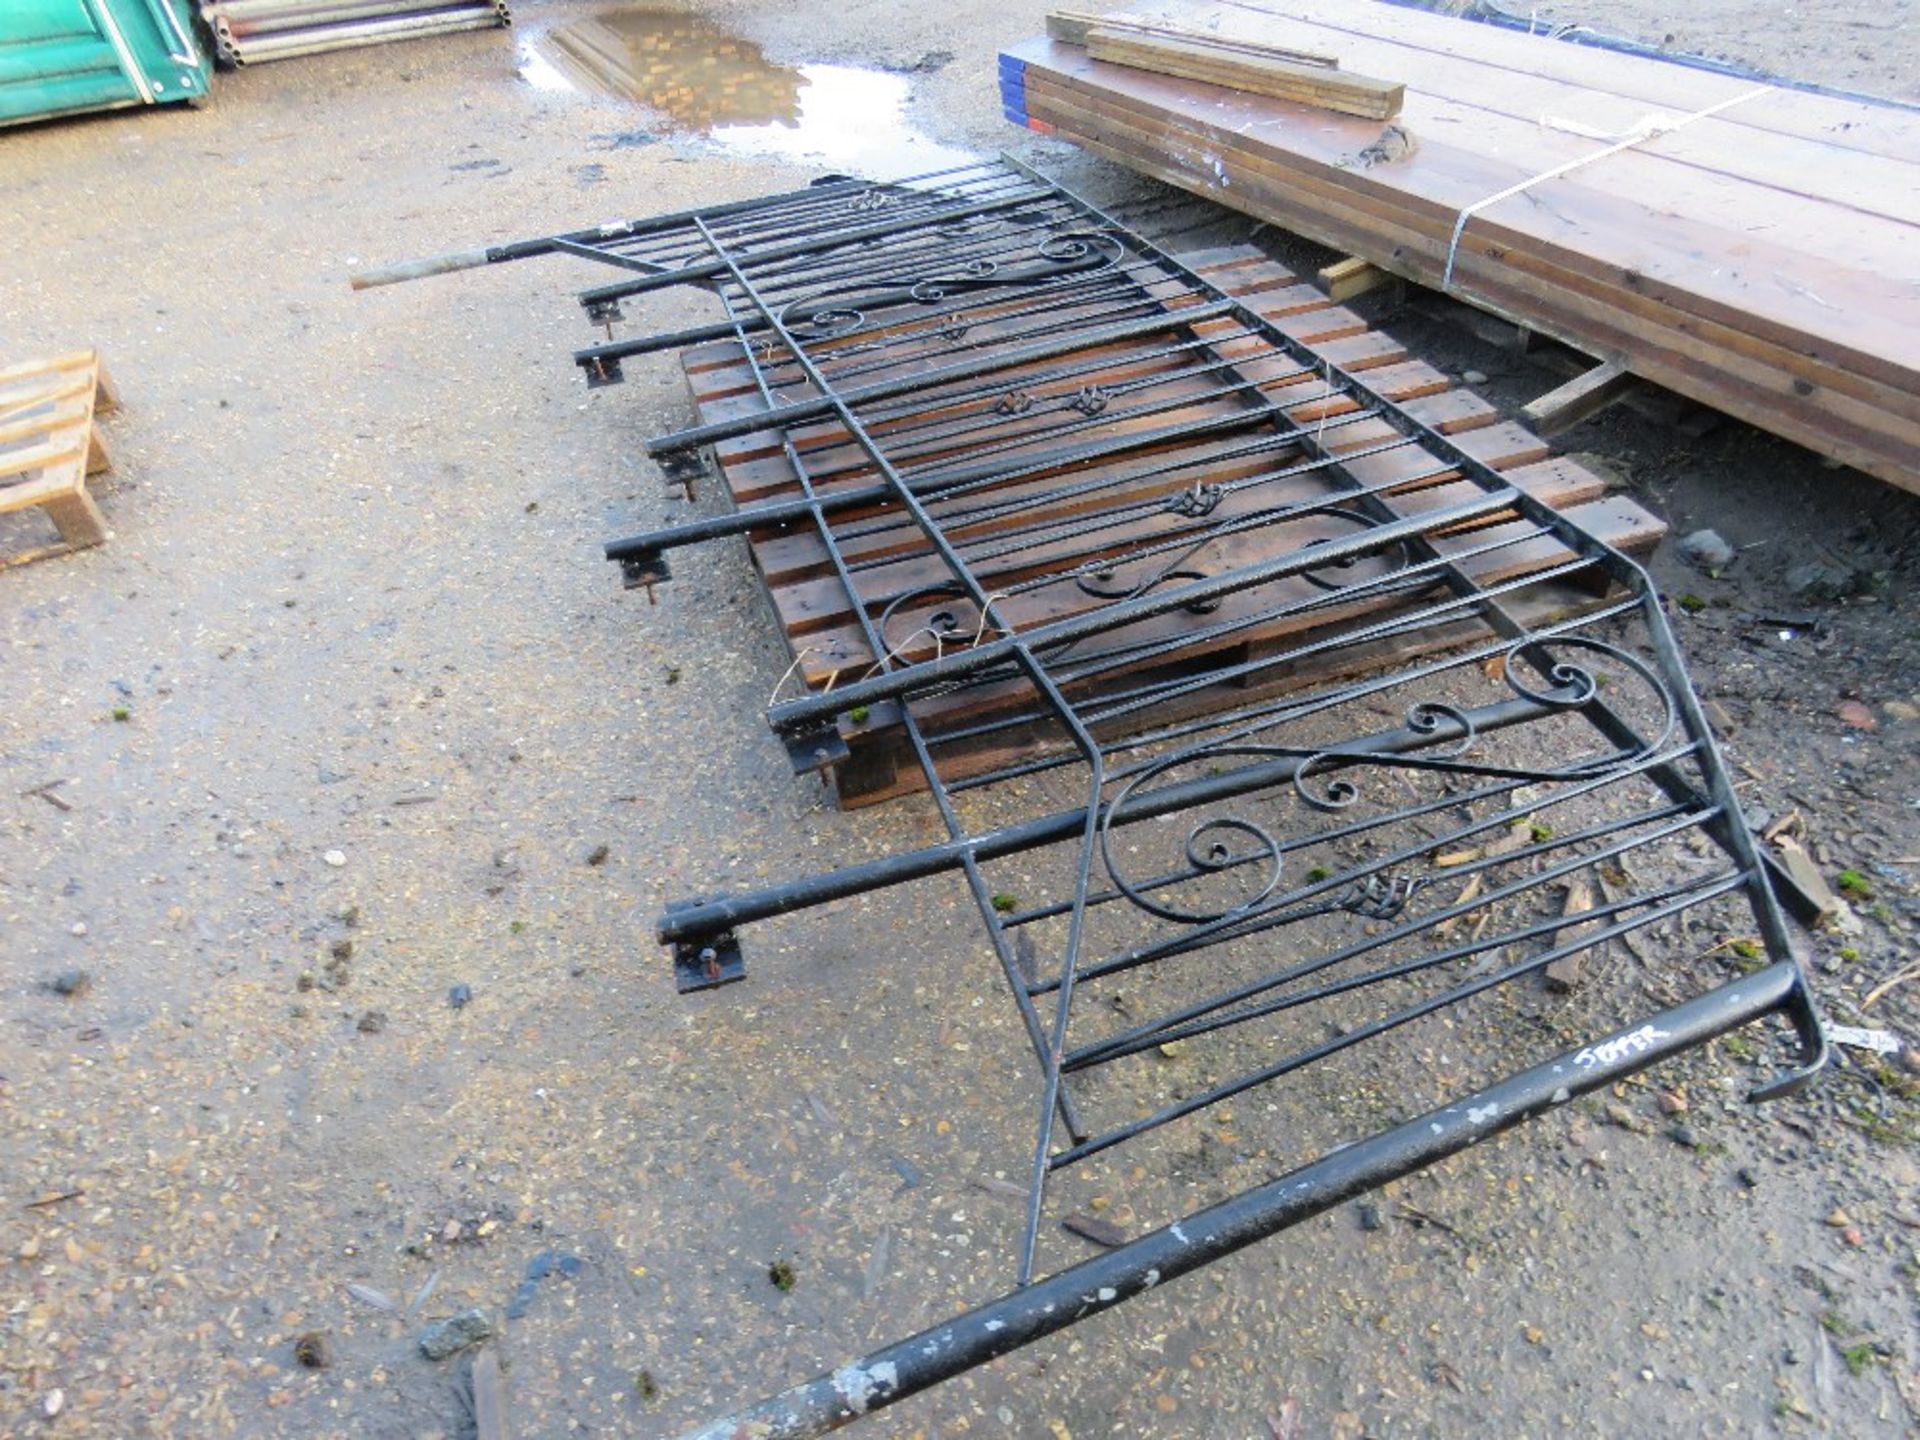 2 X DECORATIVE METAL BALLISTRADE STAIR RAILS, CIRCA 9FT LENGTH EACH This items is being item sold - Image 3 of 3